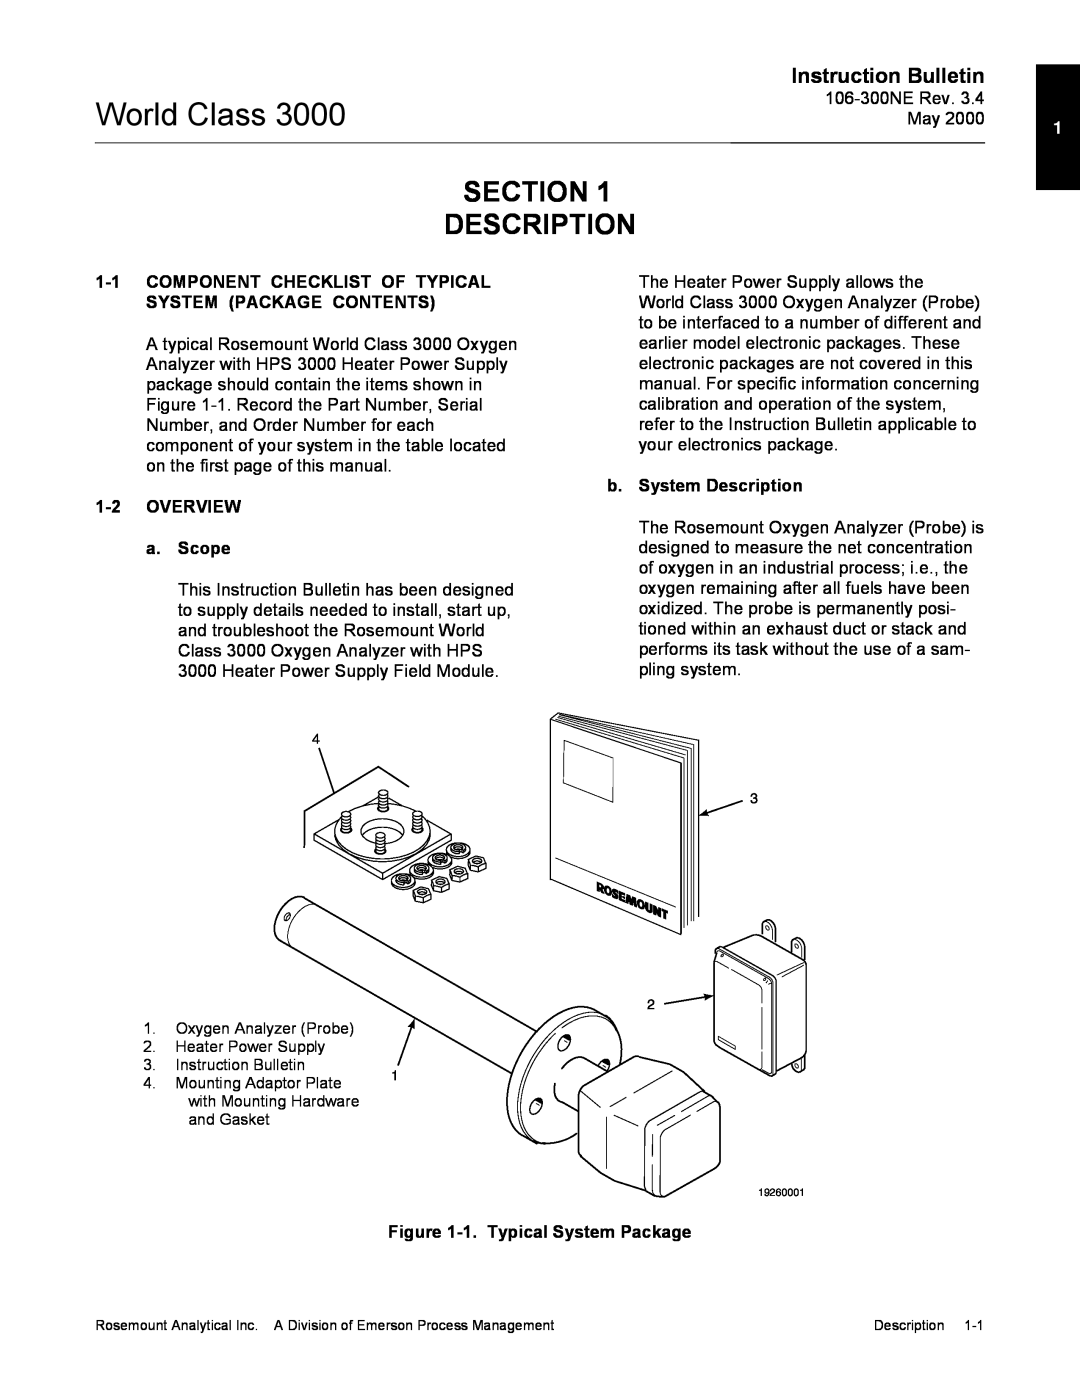 Emerson 3000 manual Section Description, Instruction Bulletin, 1-1COMPONENT CHECKLIST OF TYPICAL, System Package Contents 